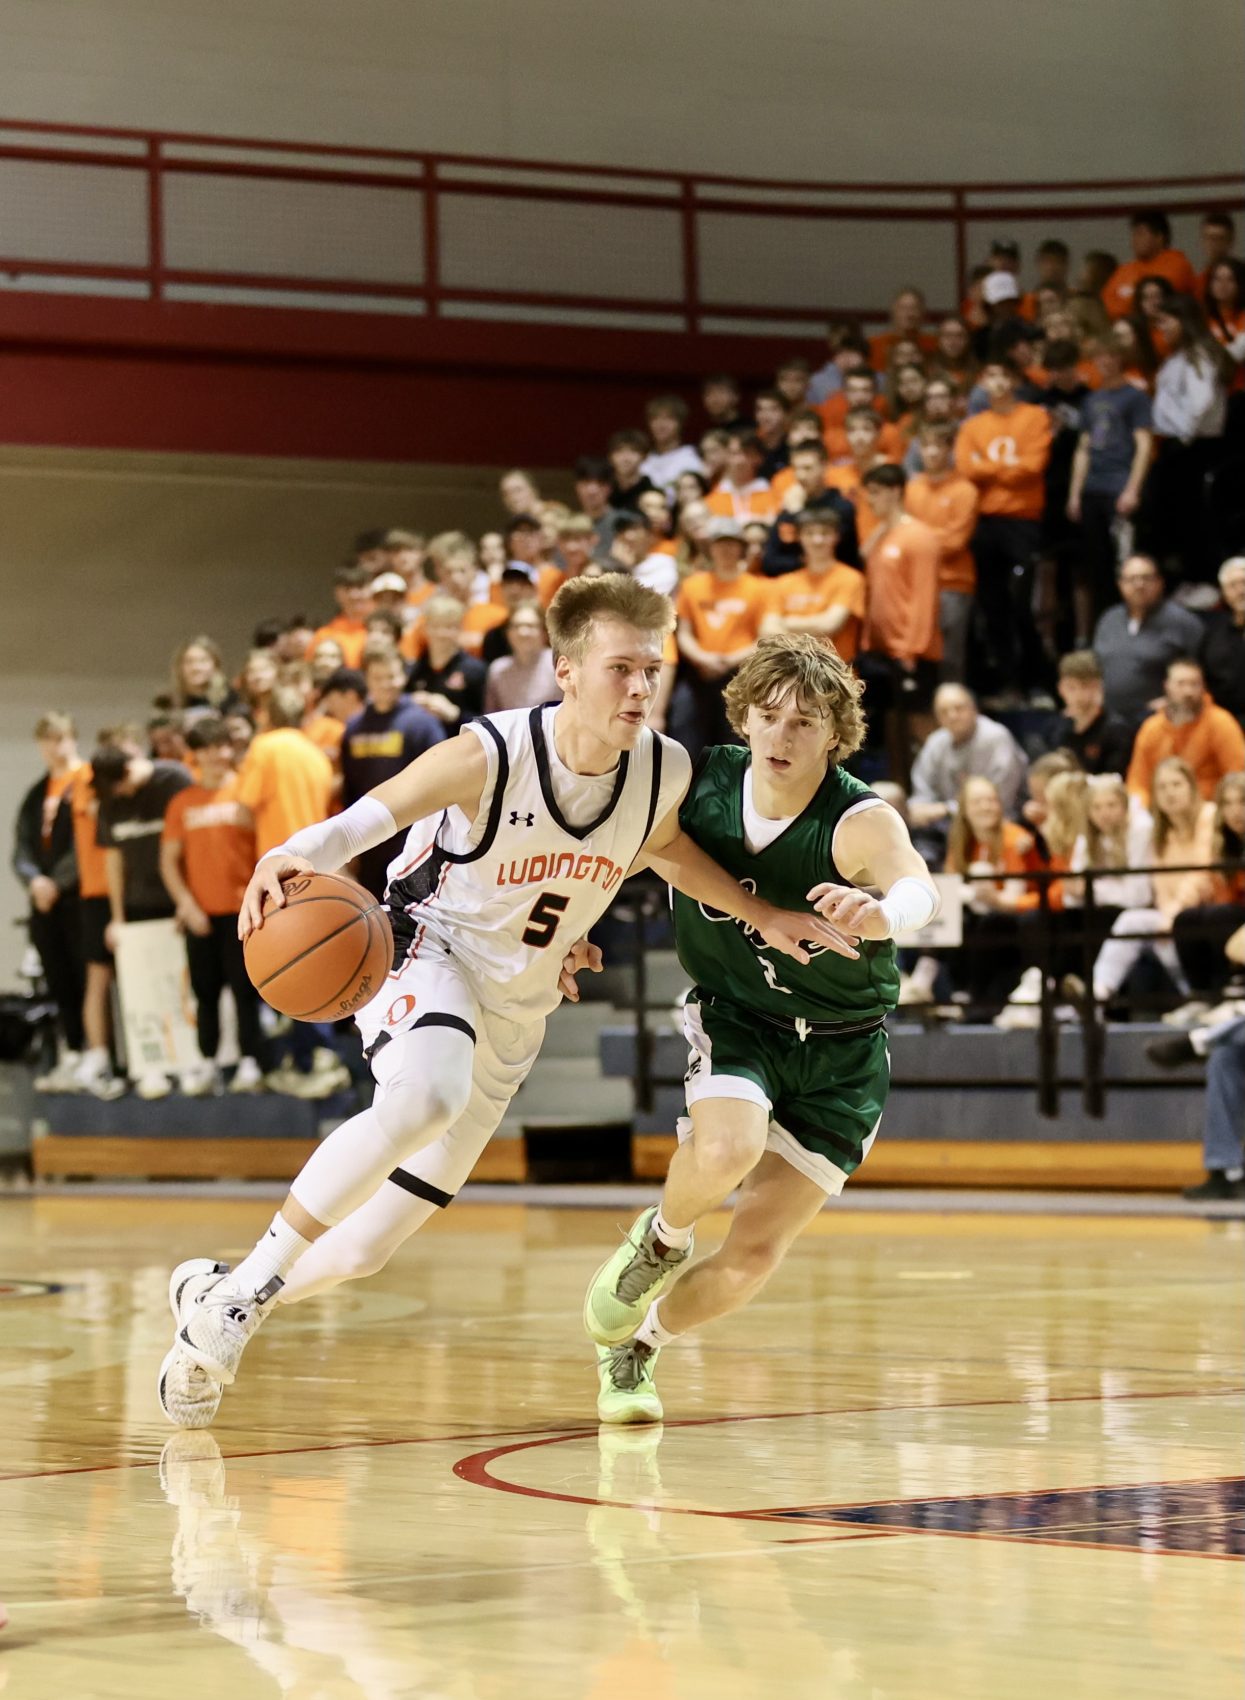 Ludington has little trouble with Clare, advances to Division 2 regional final game